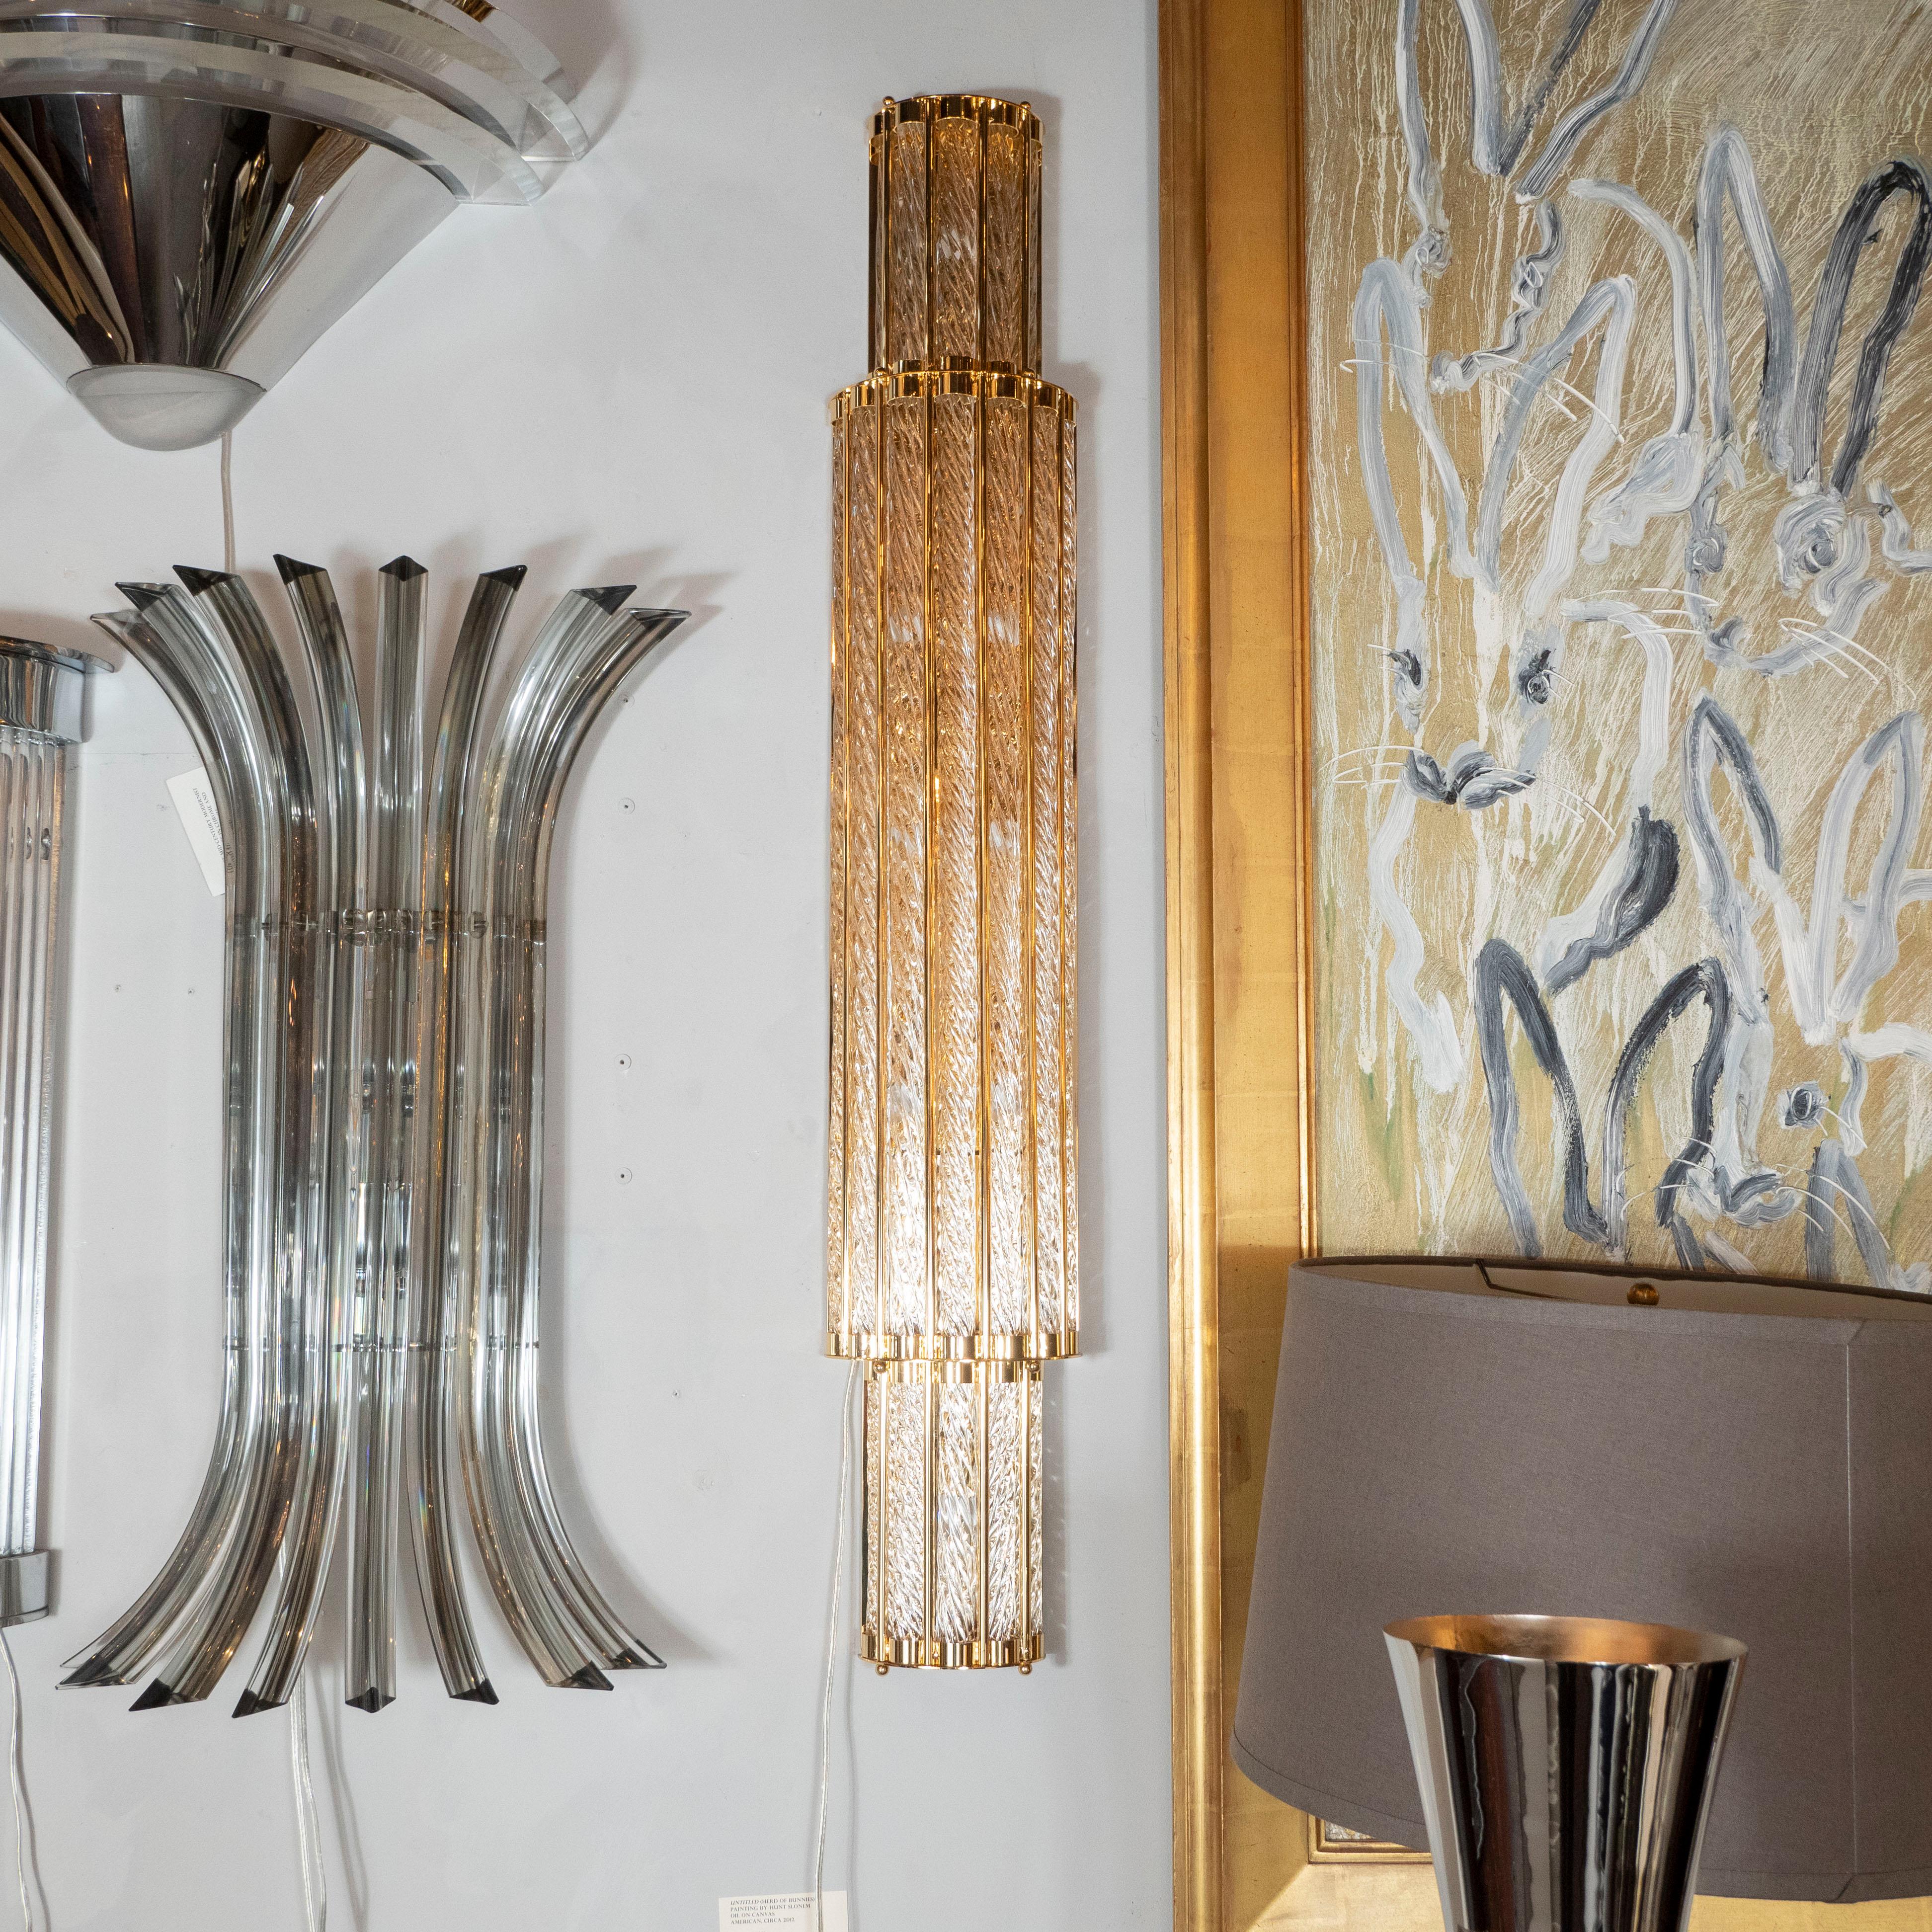 This stunning pair of modernist sconces were handblown in Murano, Italy- the island off the coast of Venice renowned for centuries for its superlative glass production- by our exclusive atelier. They feature skyscraper style convex bodies consisting